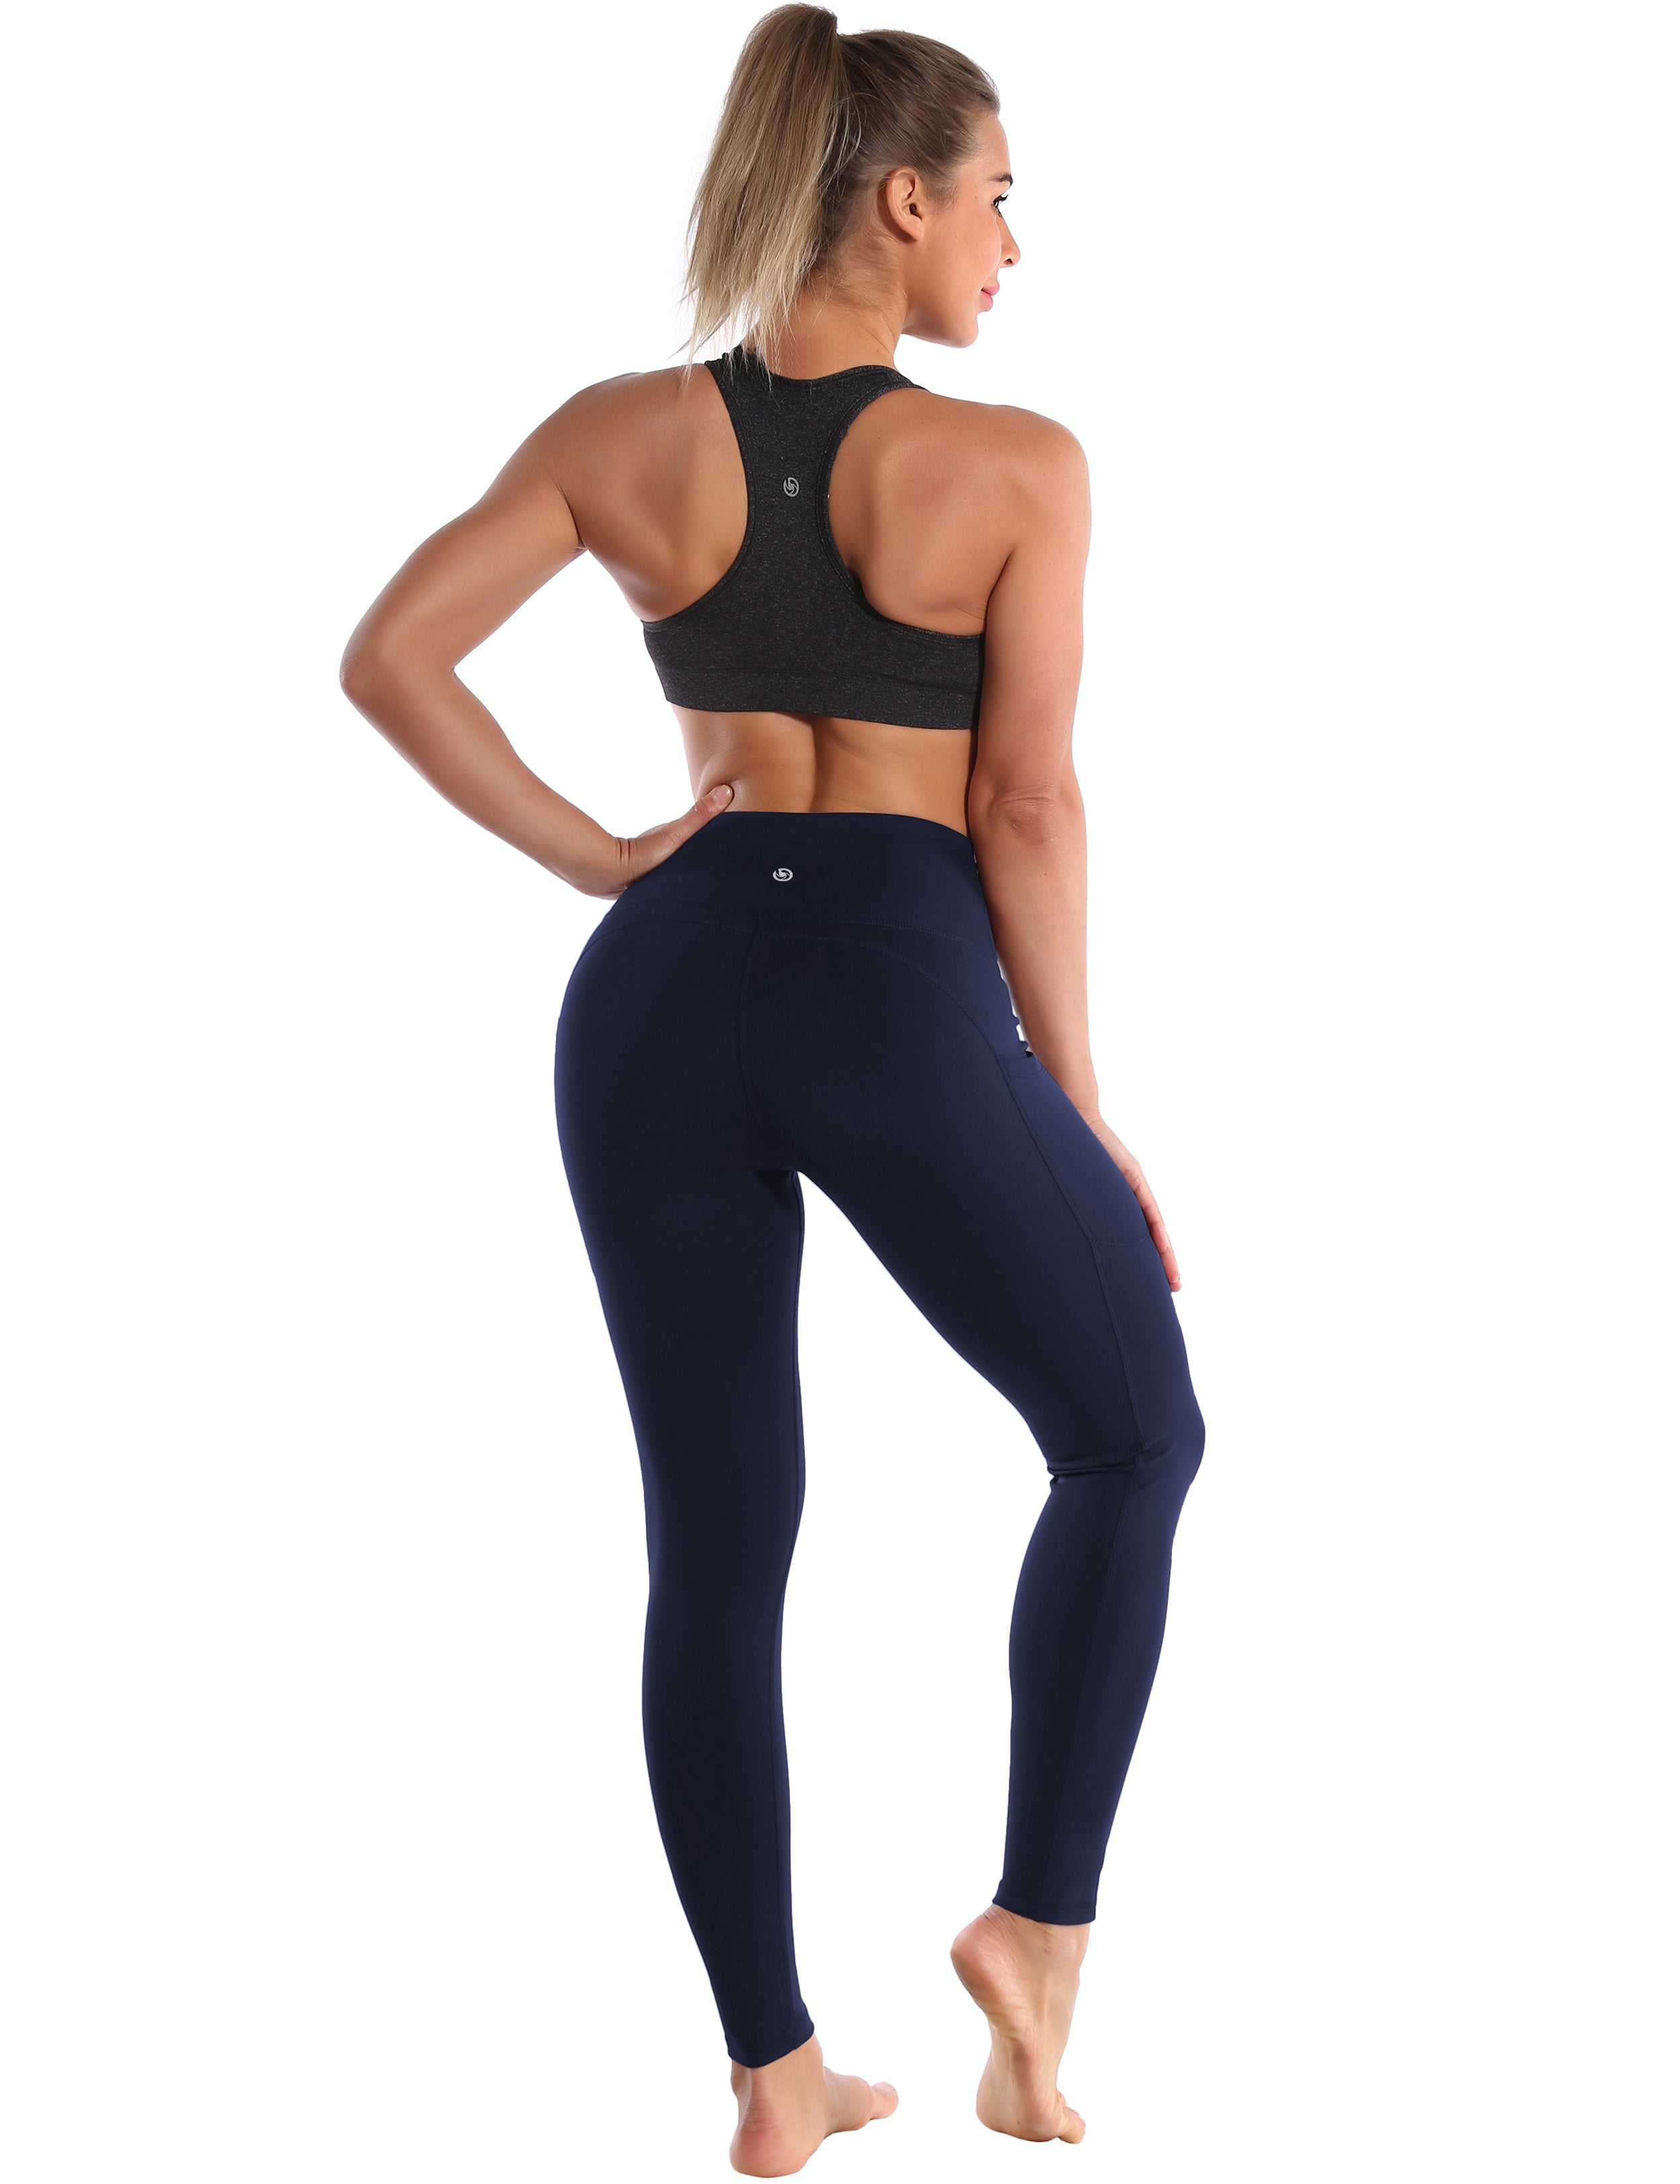 Hip Line Side Pockets Running Pants darknavy Sexy Hip Line Side Pockets 75%Nylon/25%Spandex Fabric doesn't attract lint easily 4-way stretch No see-through Moisture-wicking Tummy control Inner pocket Two lengths